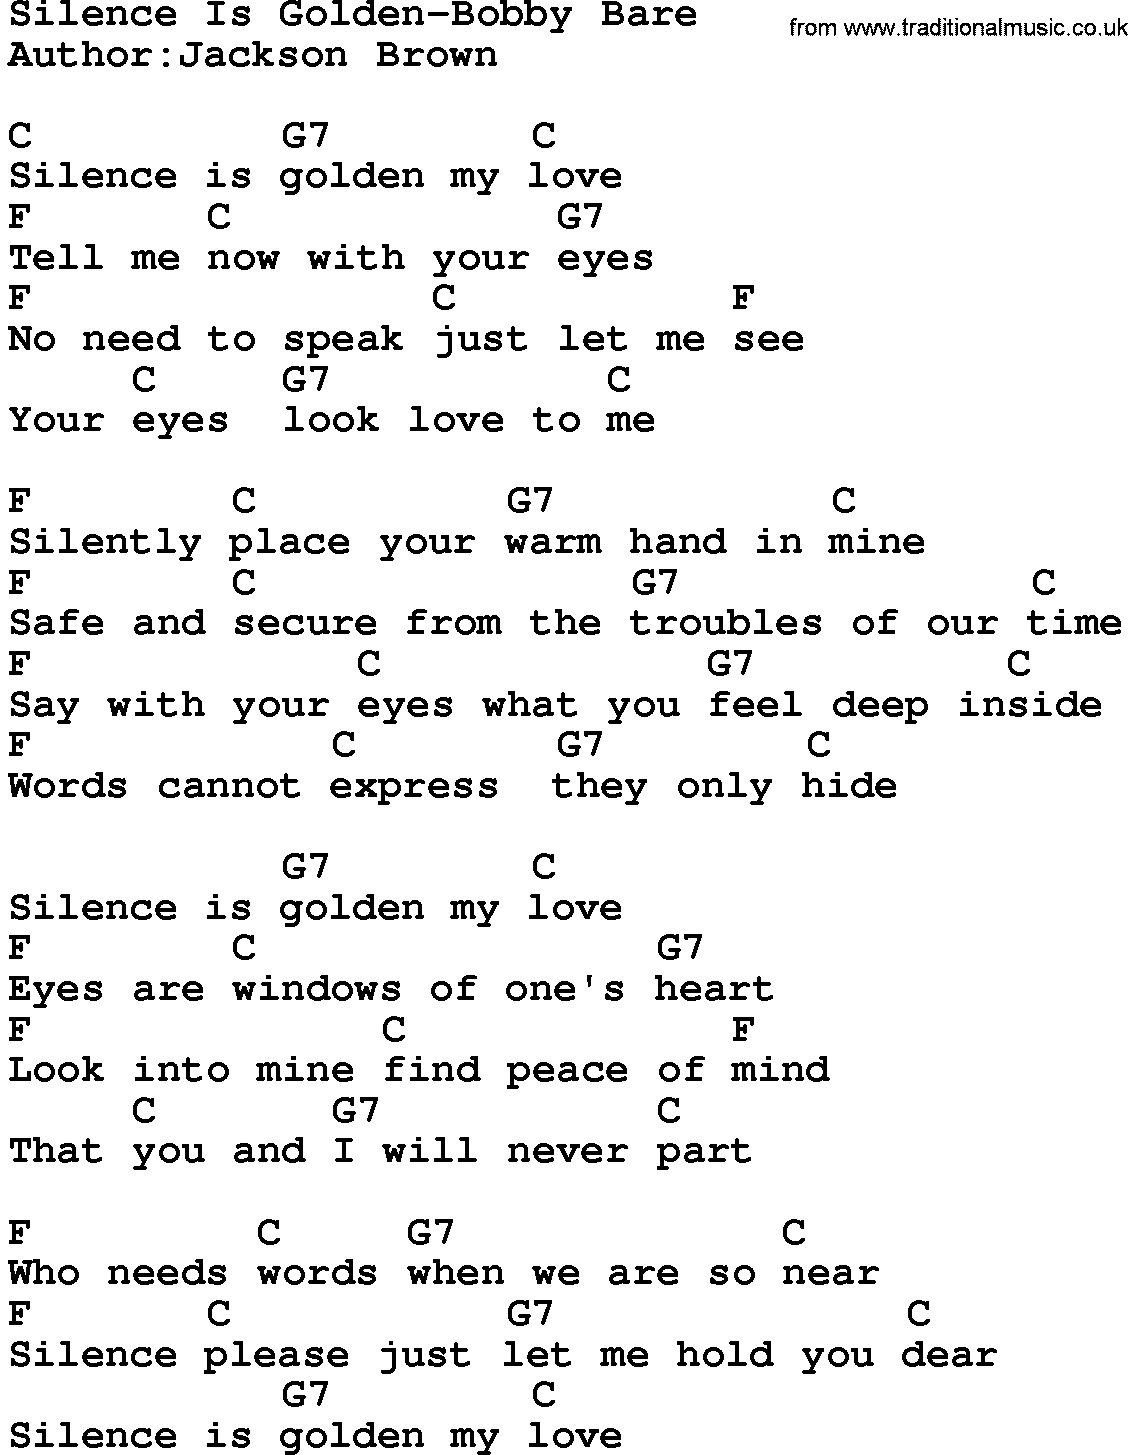 Sound Of Silence Chords Country Musicsilence Is Golden Bob Bare Lyrics And Chords